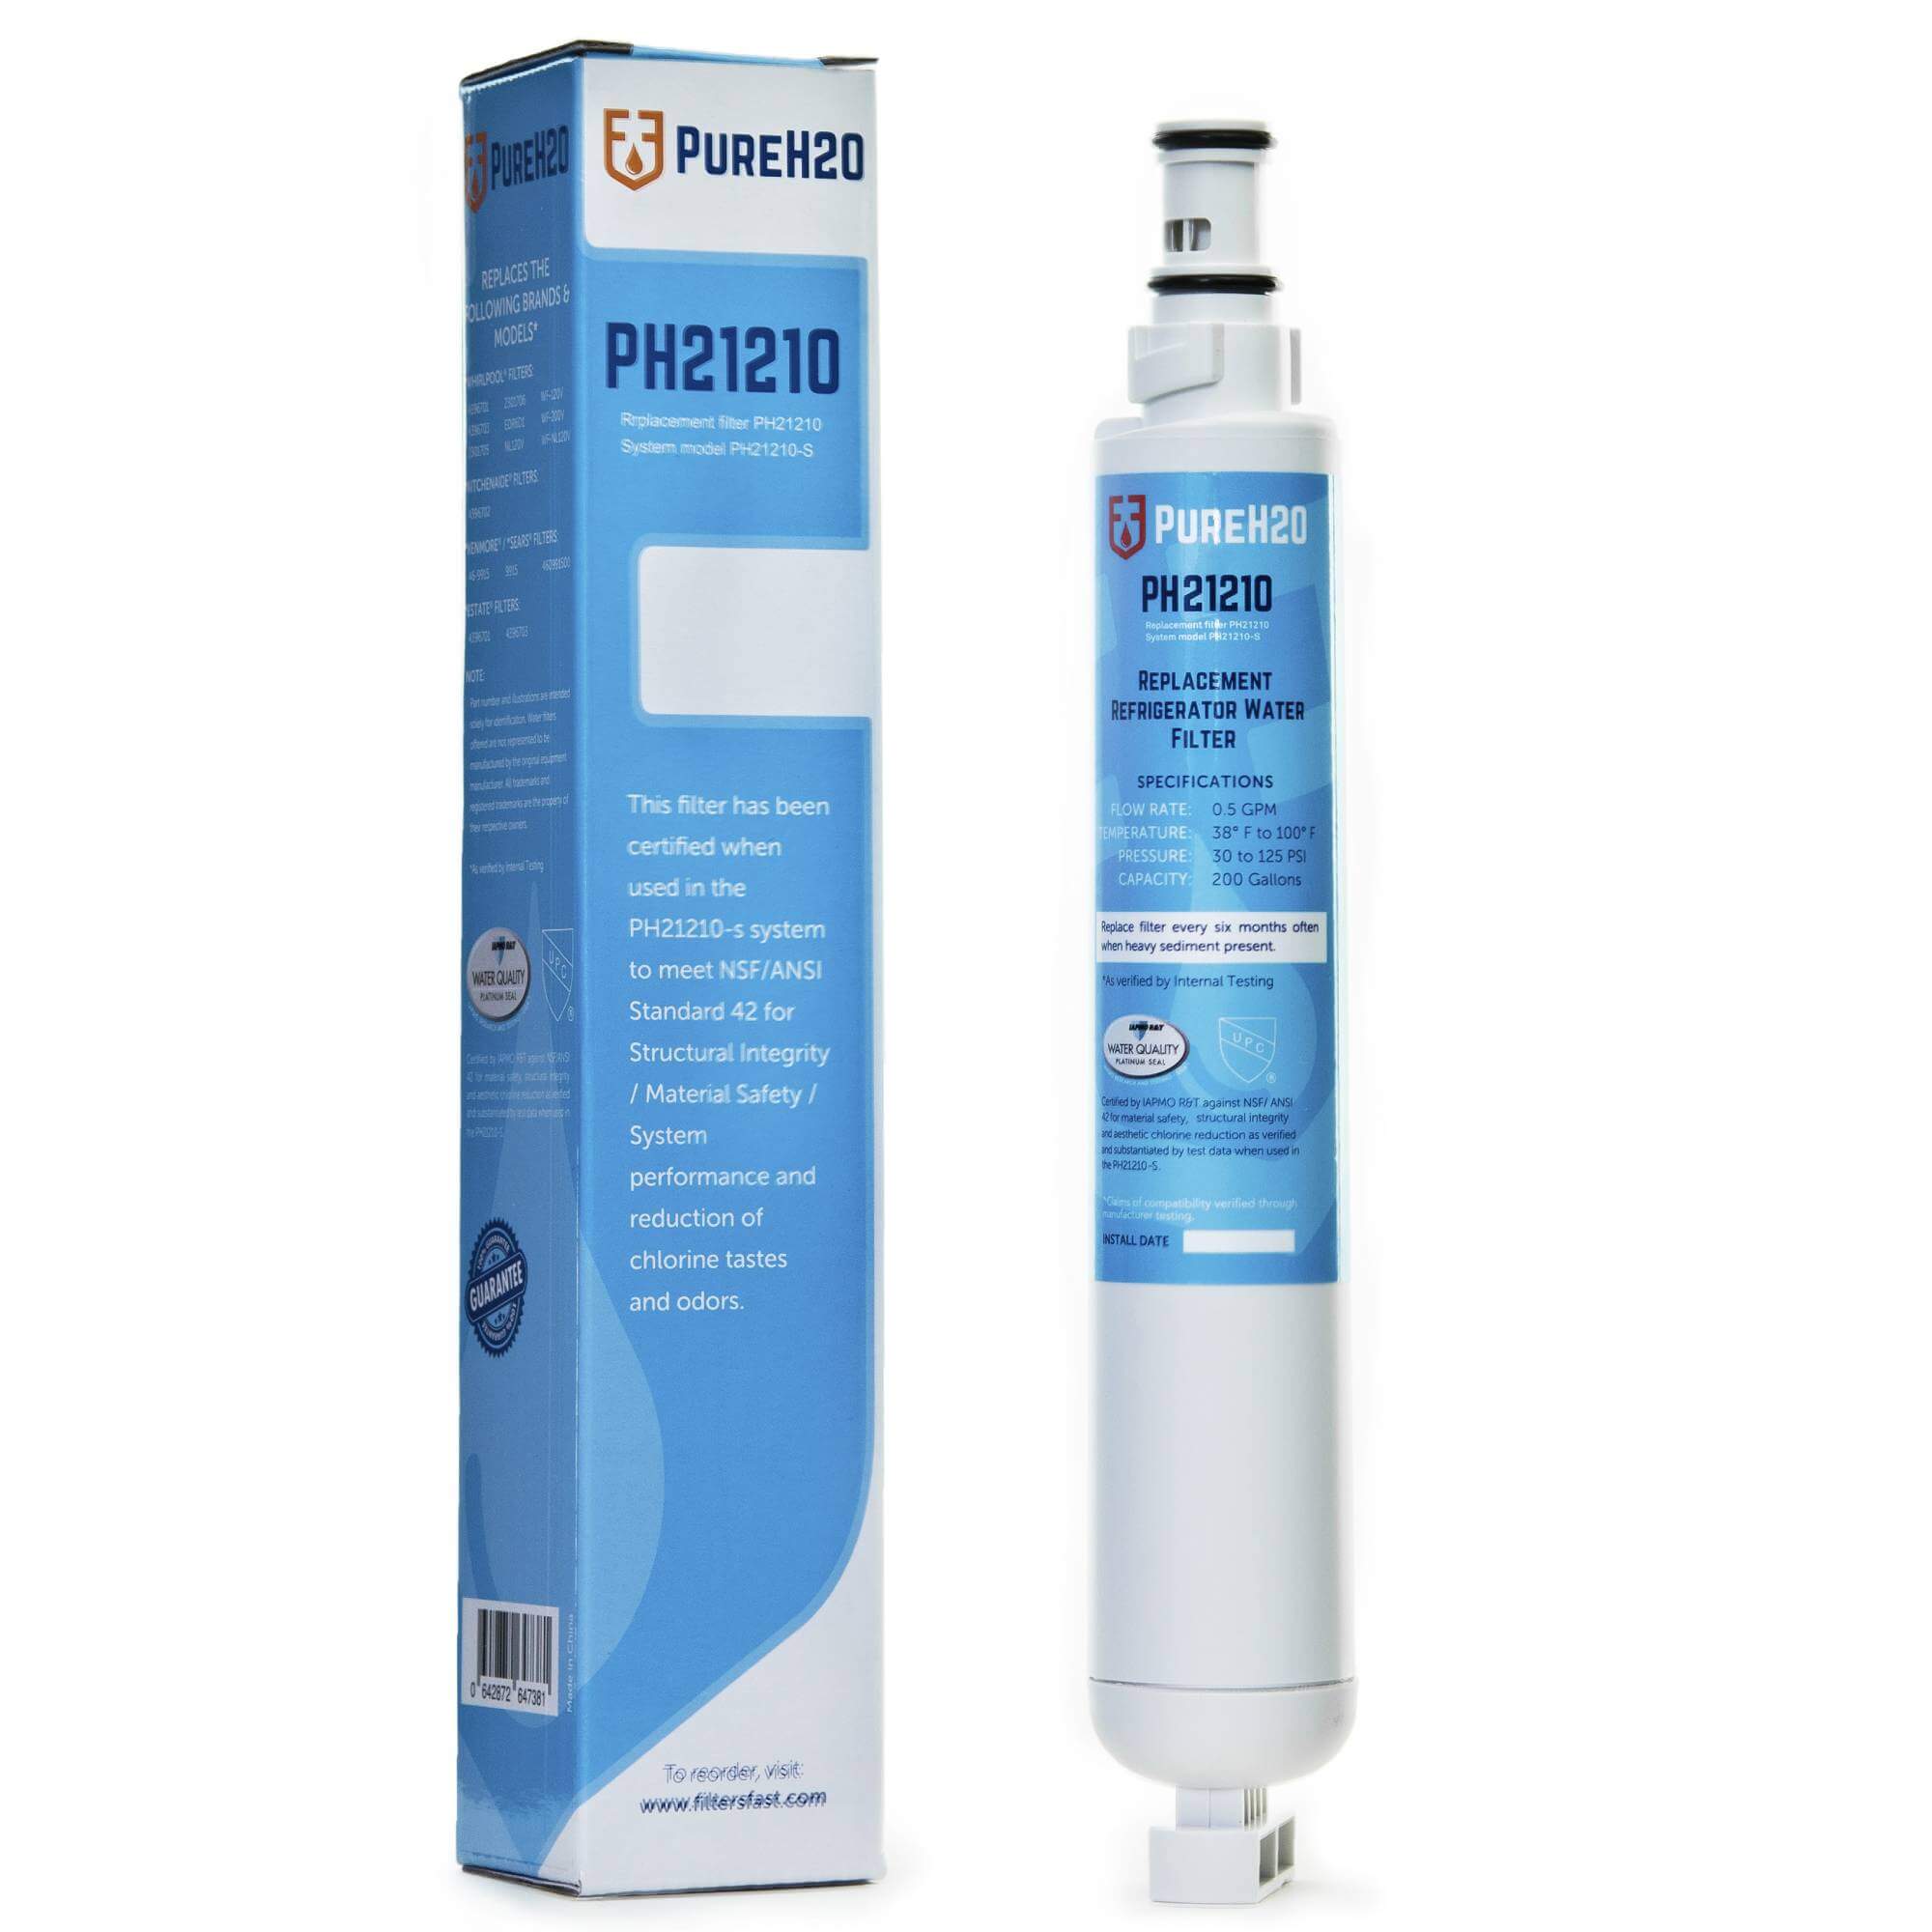 PureH2O PH21210 Replacement for Tier1 RWF1021